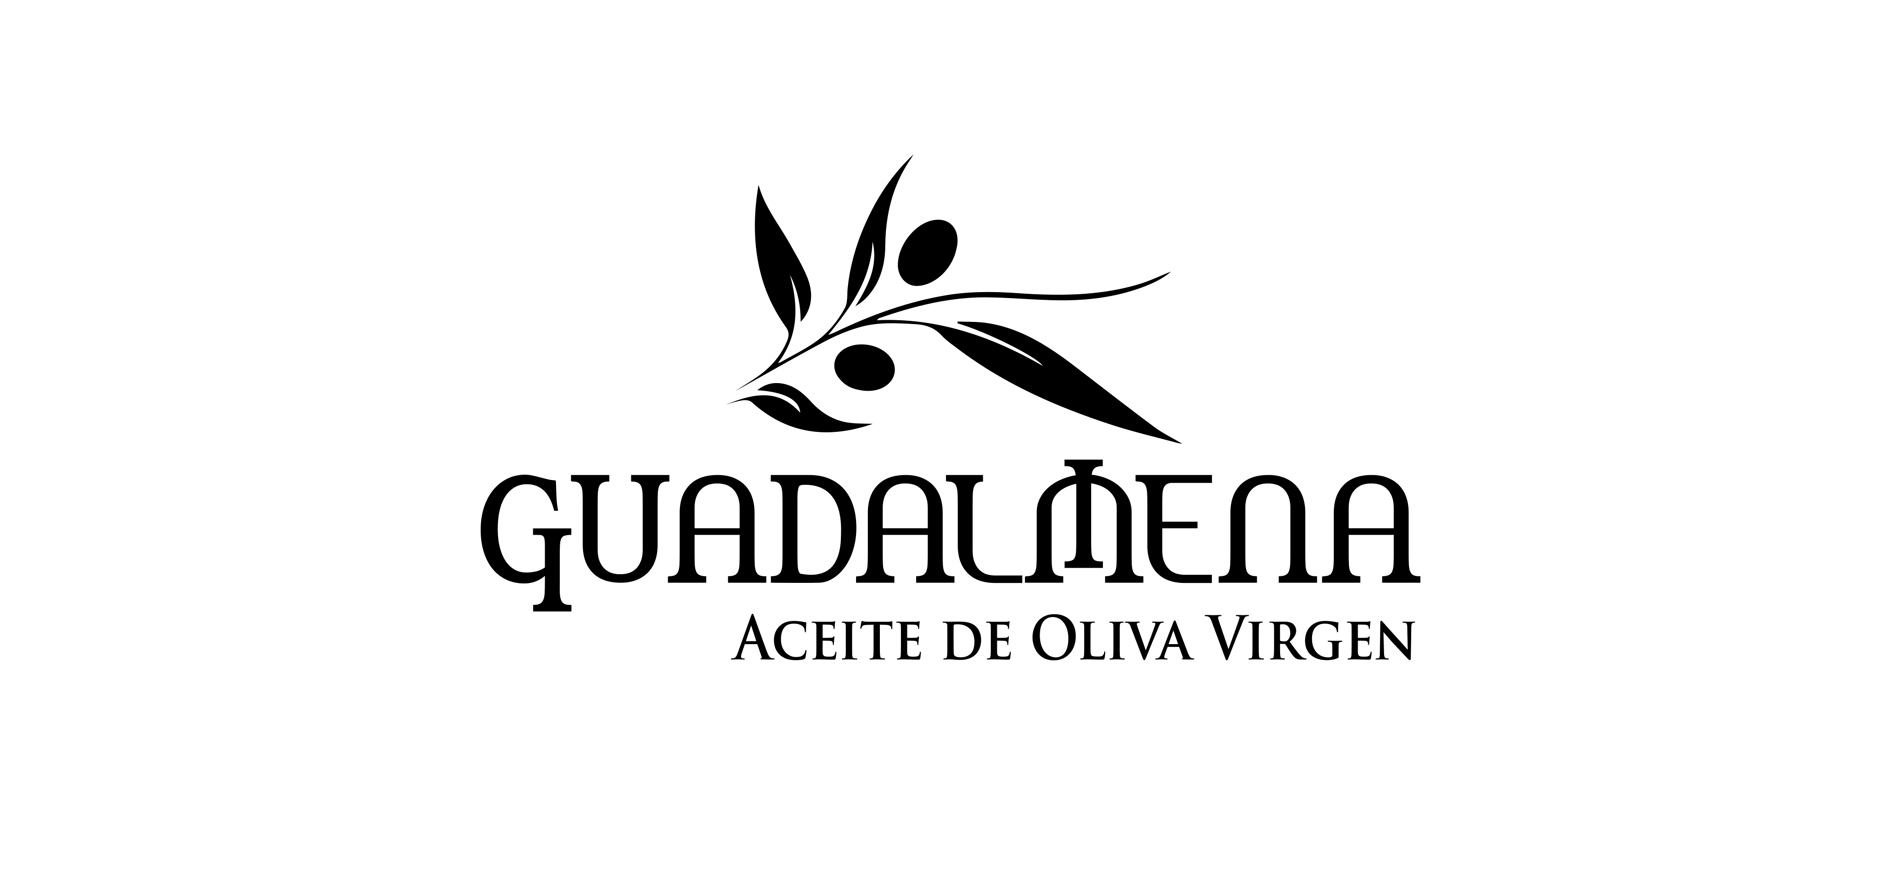 Portfolio of graphic and creative design works of extra virgin olive oil label design and packaging for GUADALMENA